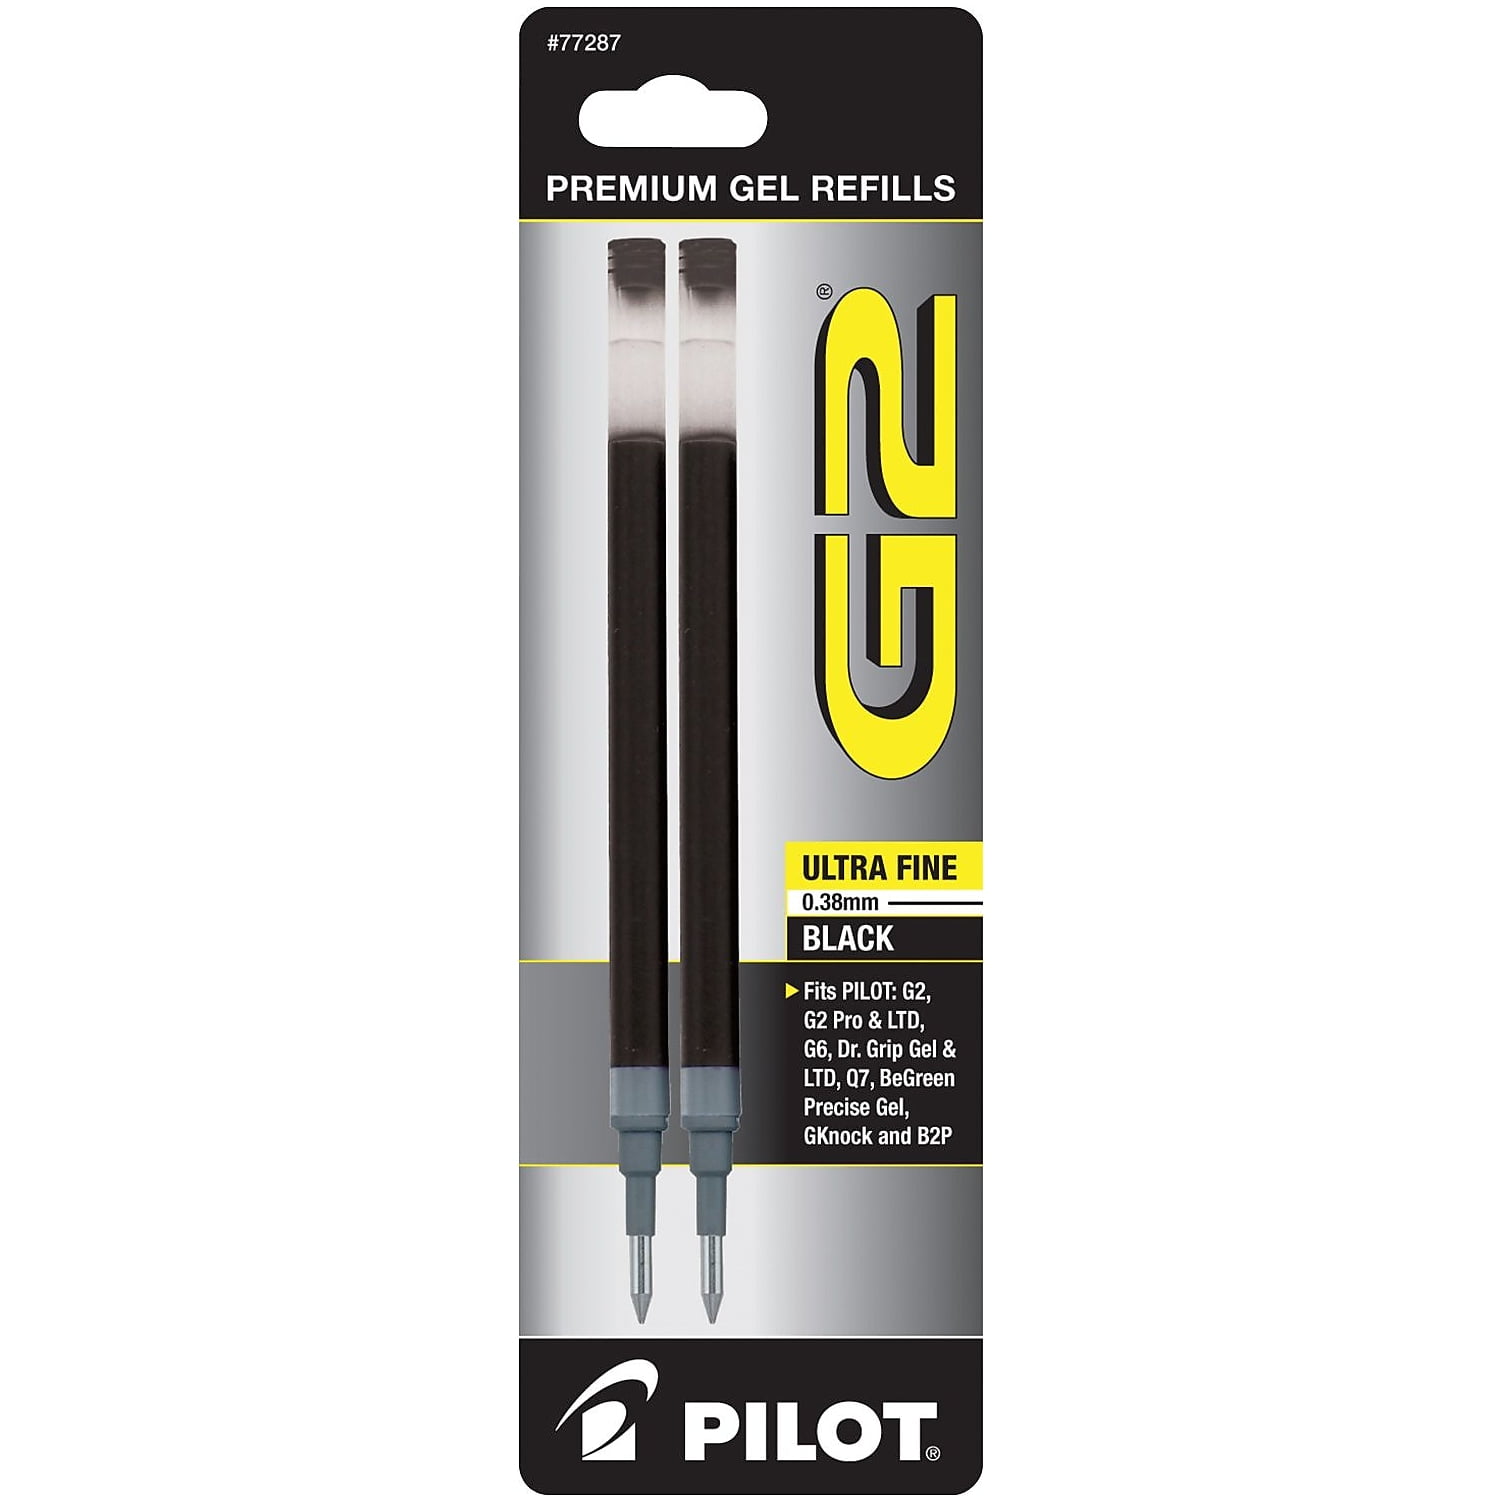 Fastest way to refill a Pilot V-sign pen. 